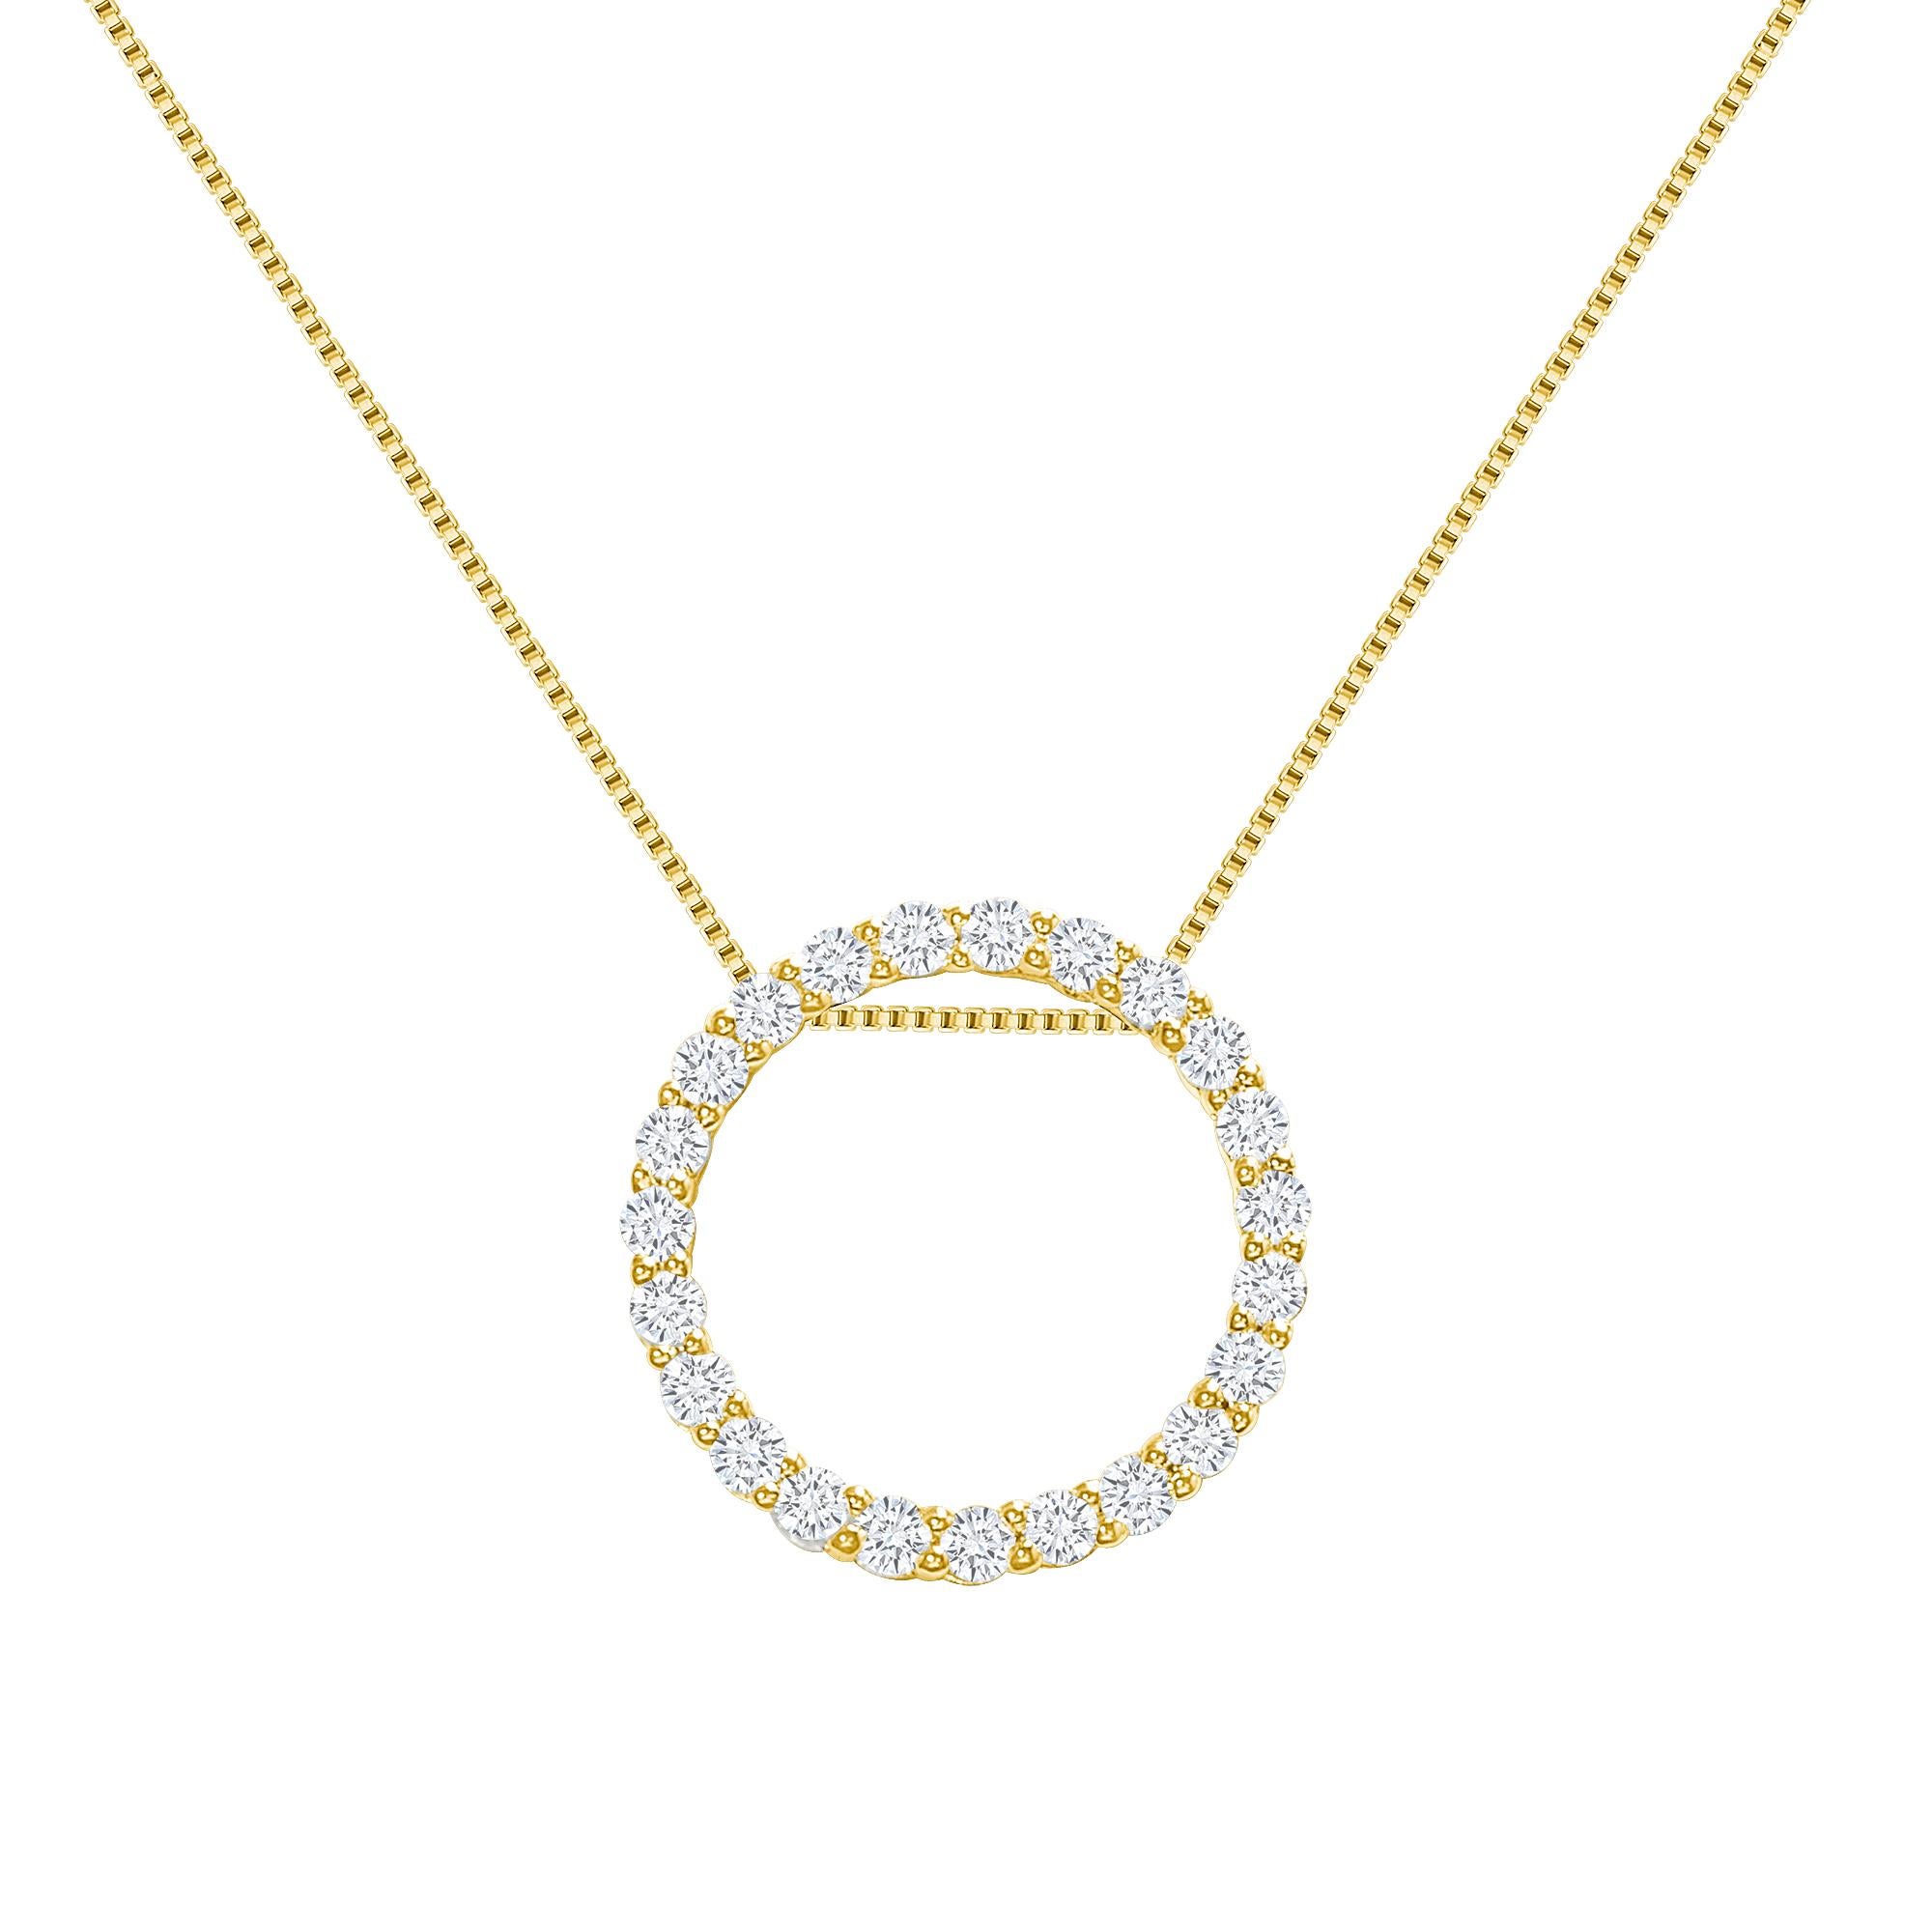 This diamond circle pendant provides a glowing chic look.
Metal: 14k Gold
Diamond Total Carats: 1 carat
Diamond Cut: Round Natural Diamonds (Not Lab Grown)
Diamond Clarity: VS
Diamond Color: F-G
Color: Yellow Gold
Necklace Length: 14 inches